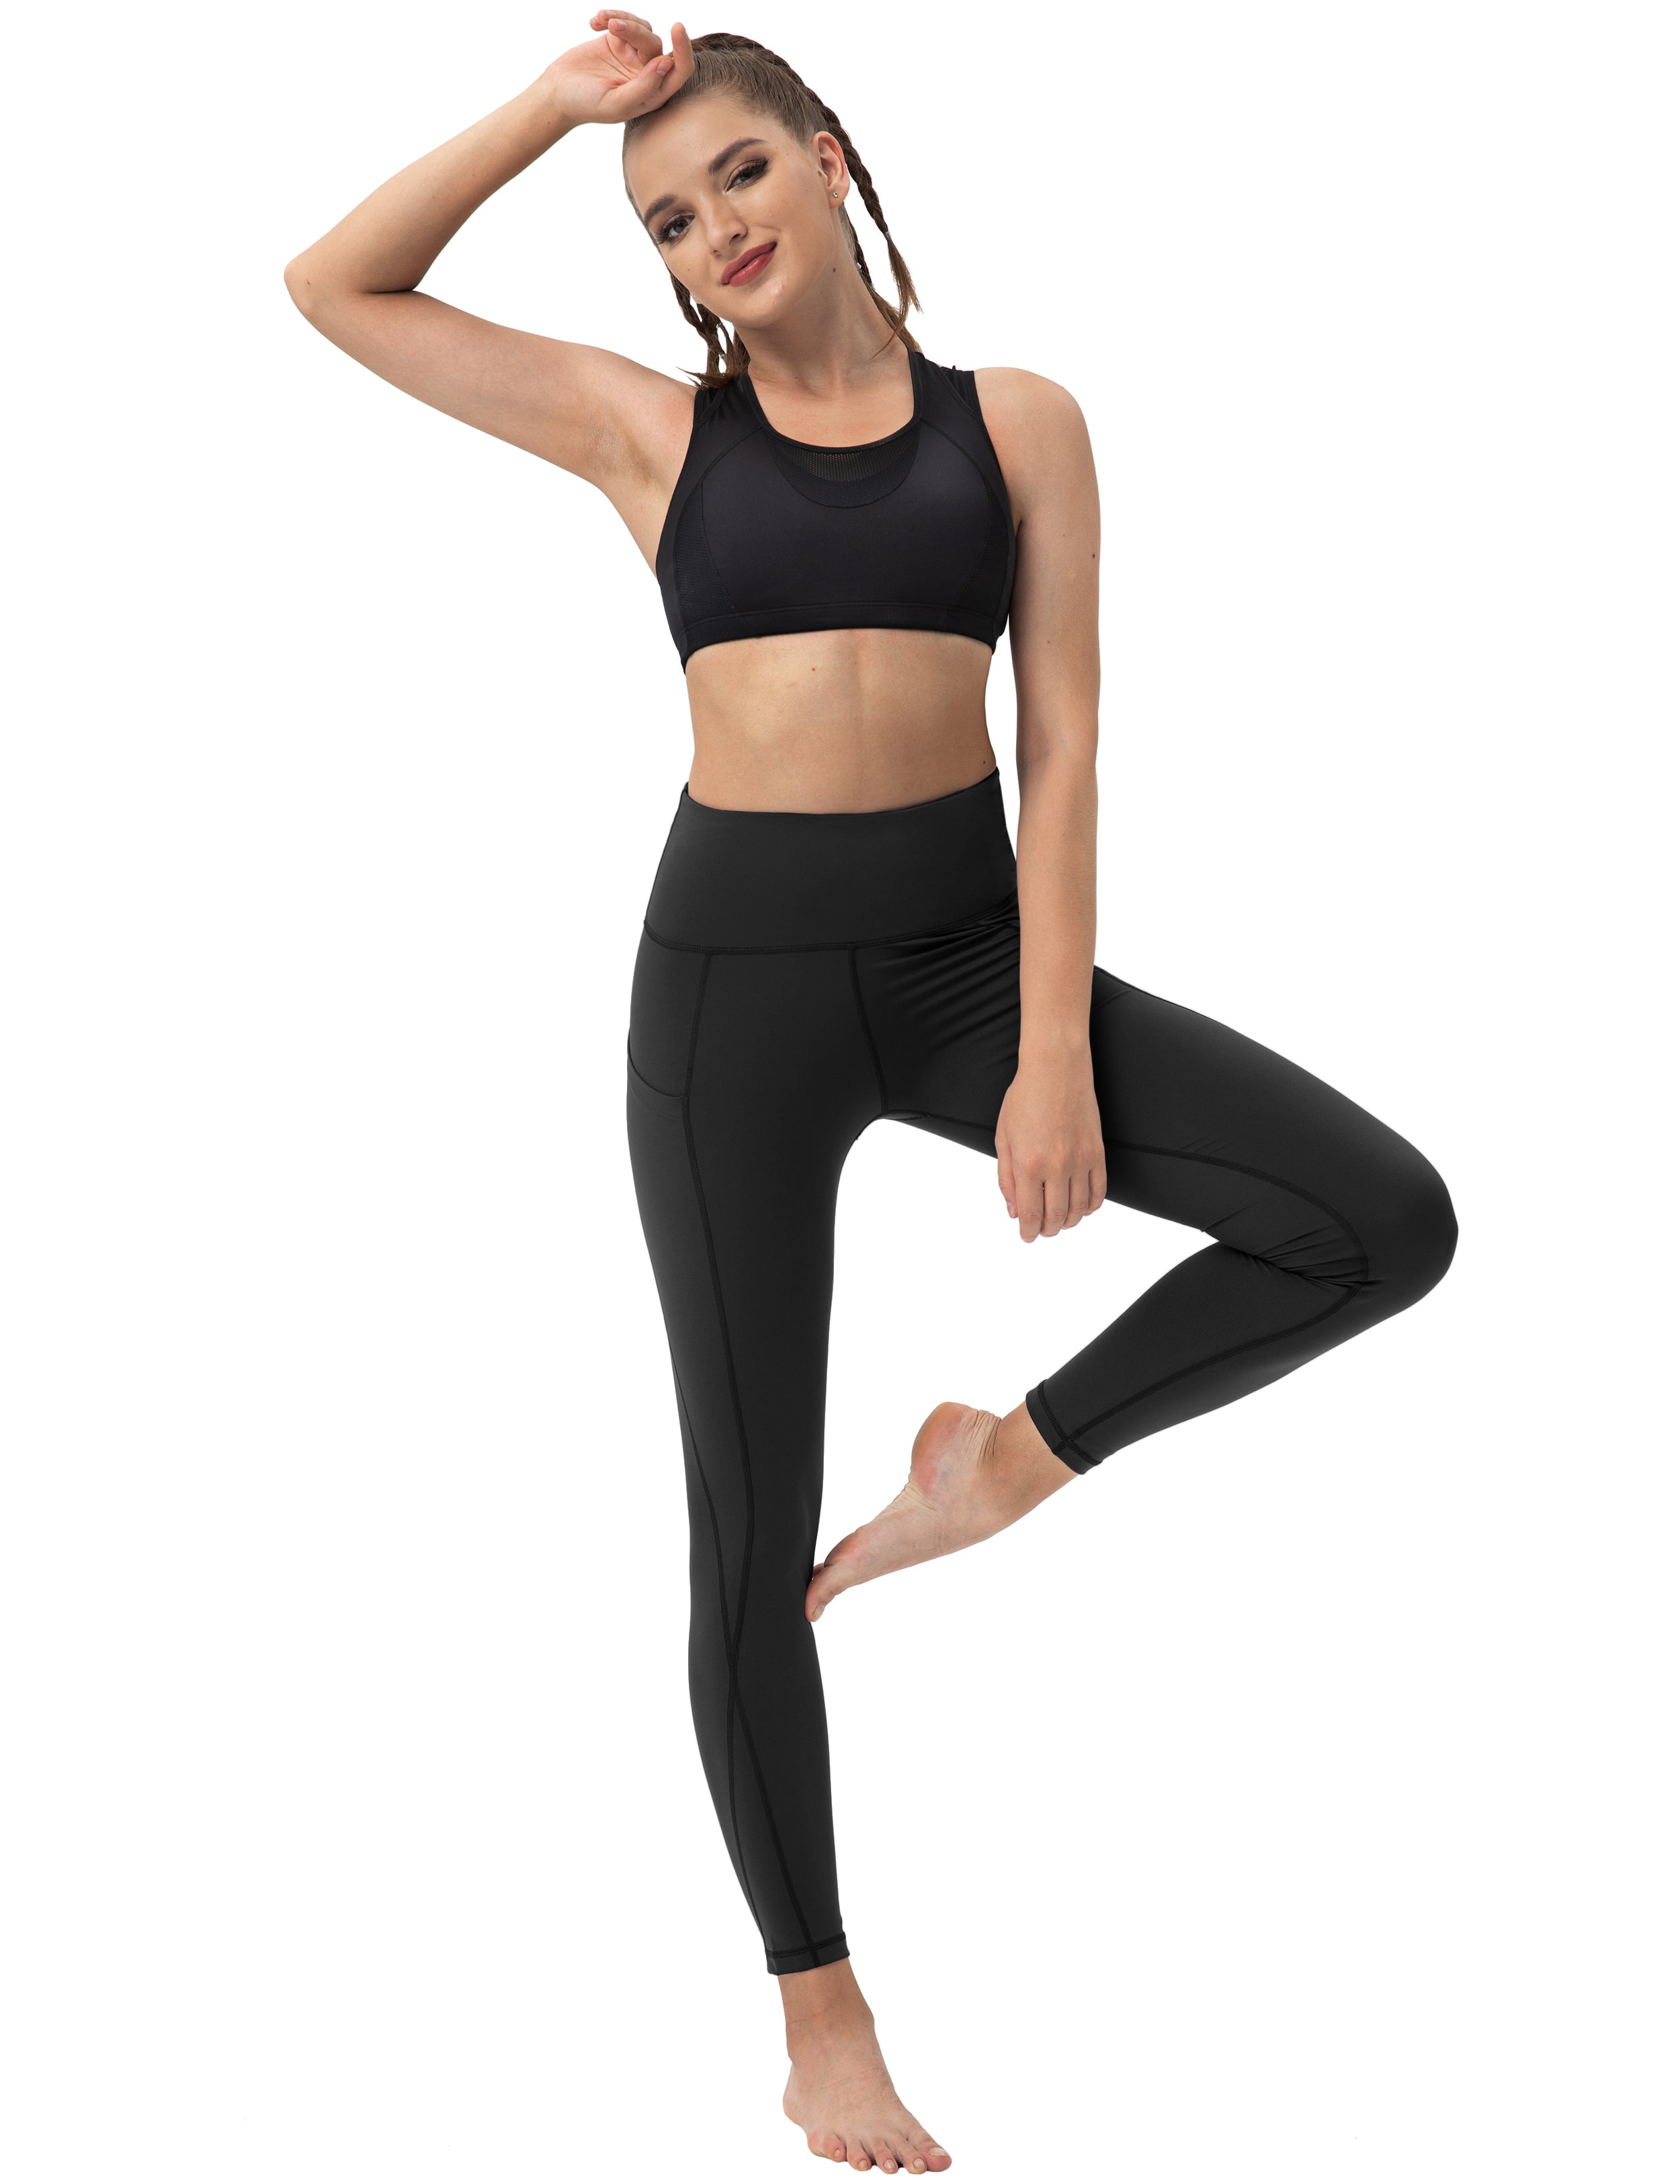 High Waist Side Pockets Tall Size Pants black 75% Nylon, 25% Spandex Fabric doesn't attract lint easily 4-way stretch No see-through Moisture-wicking Tummy control Inner pocket